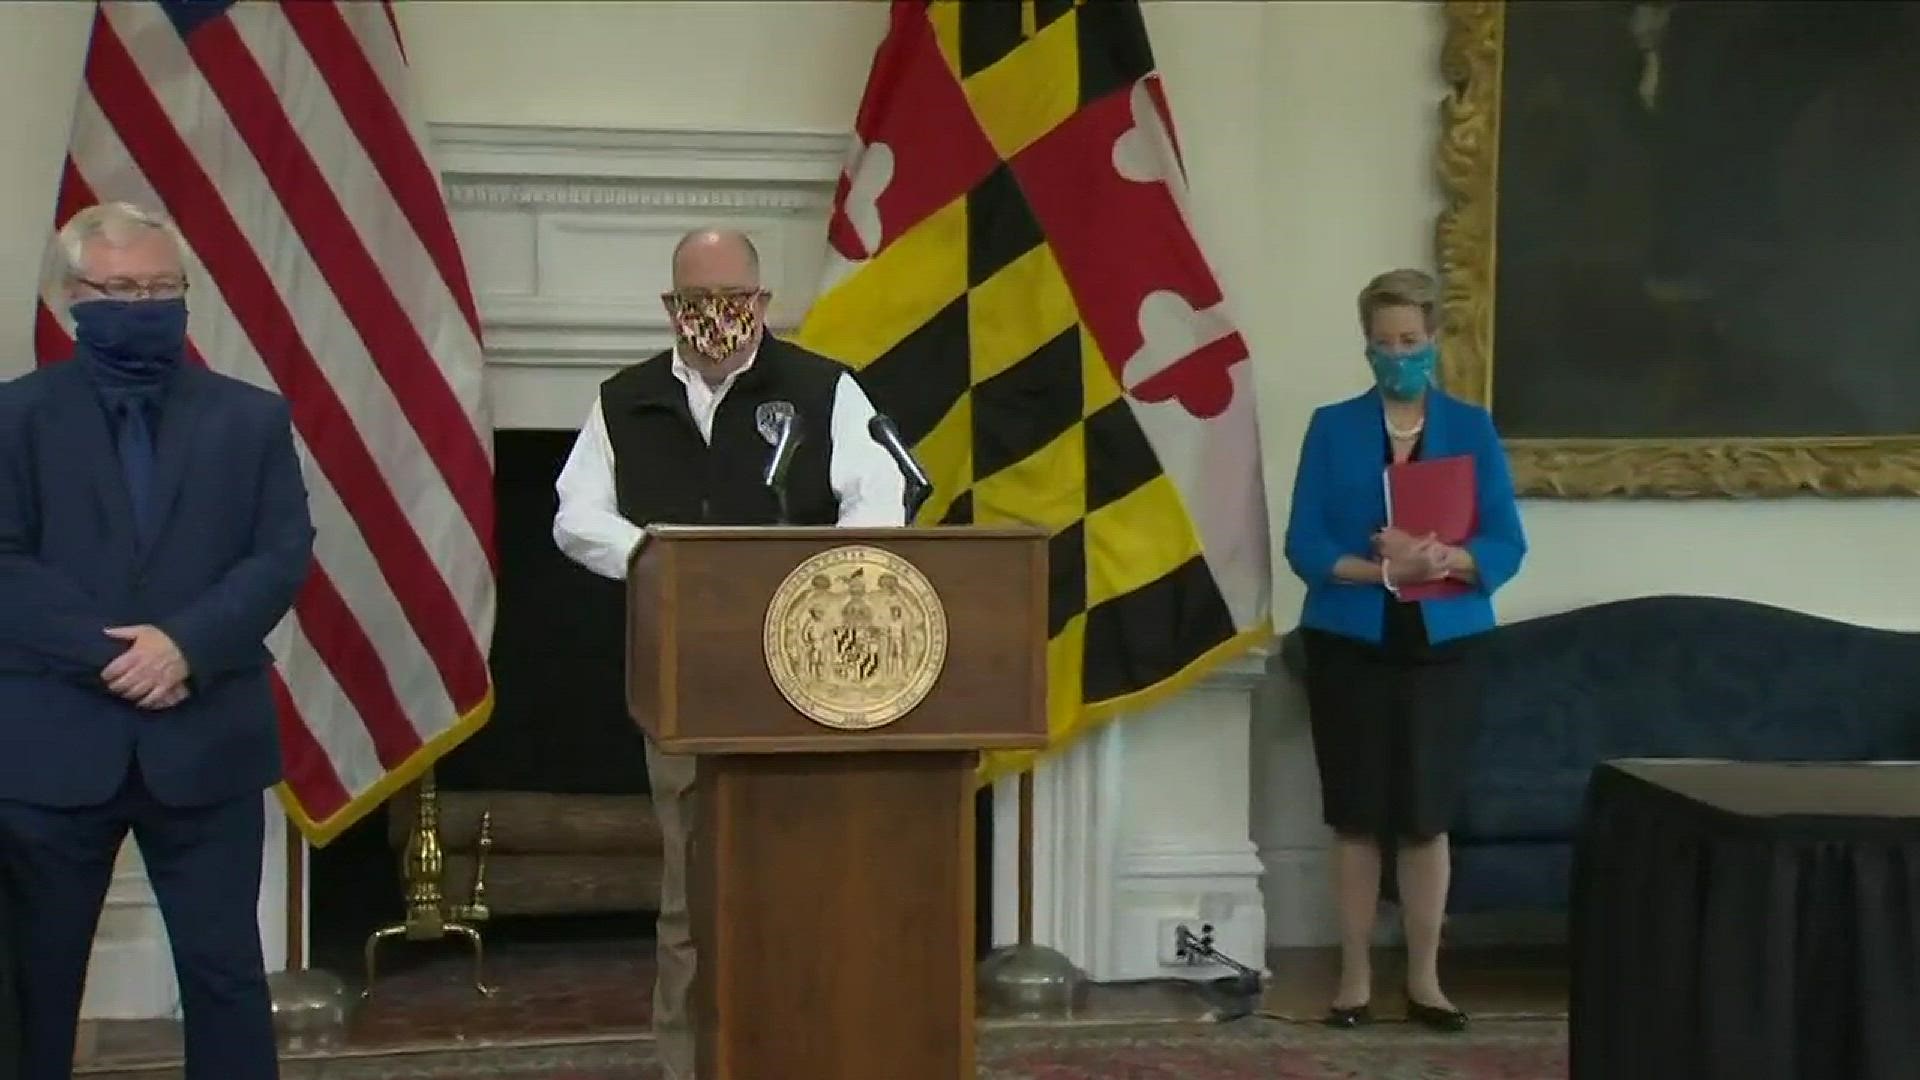 Maryland's four-block roadmap to recovery is in full swing, Gov. Hogan announced on Wednesday. Outdoor activities like golf and camping will be permitted.